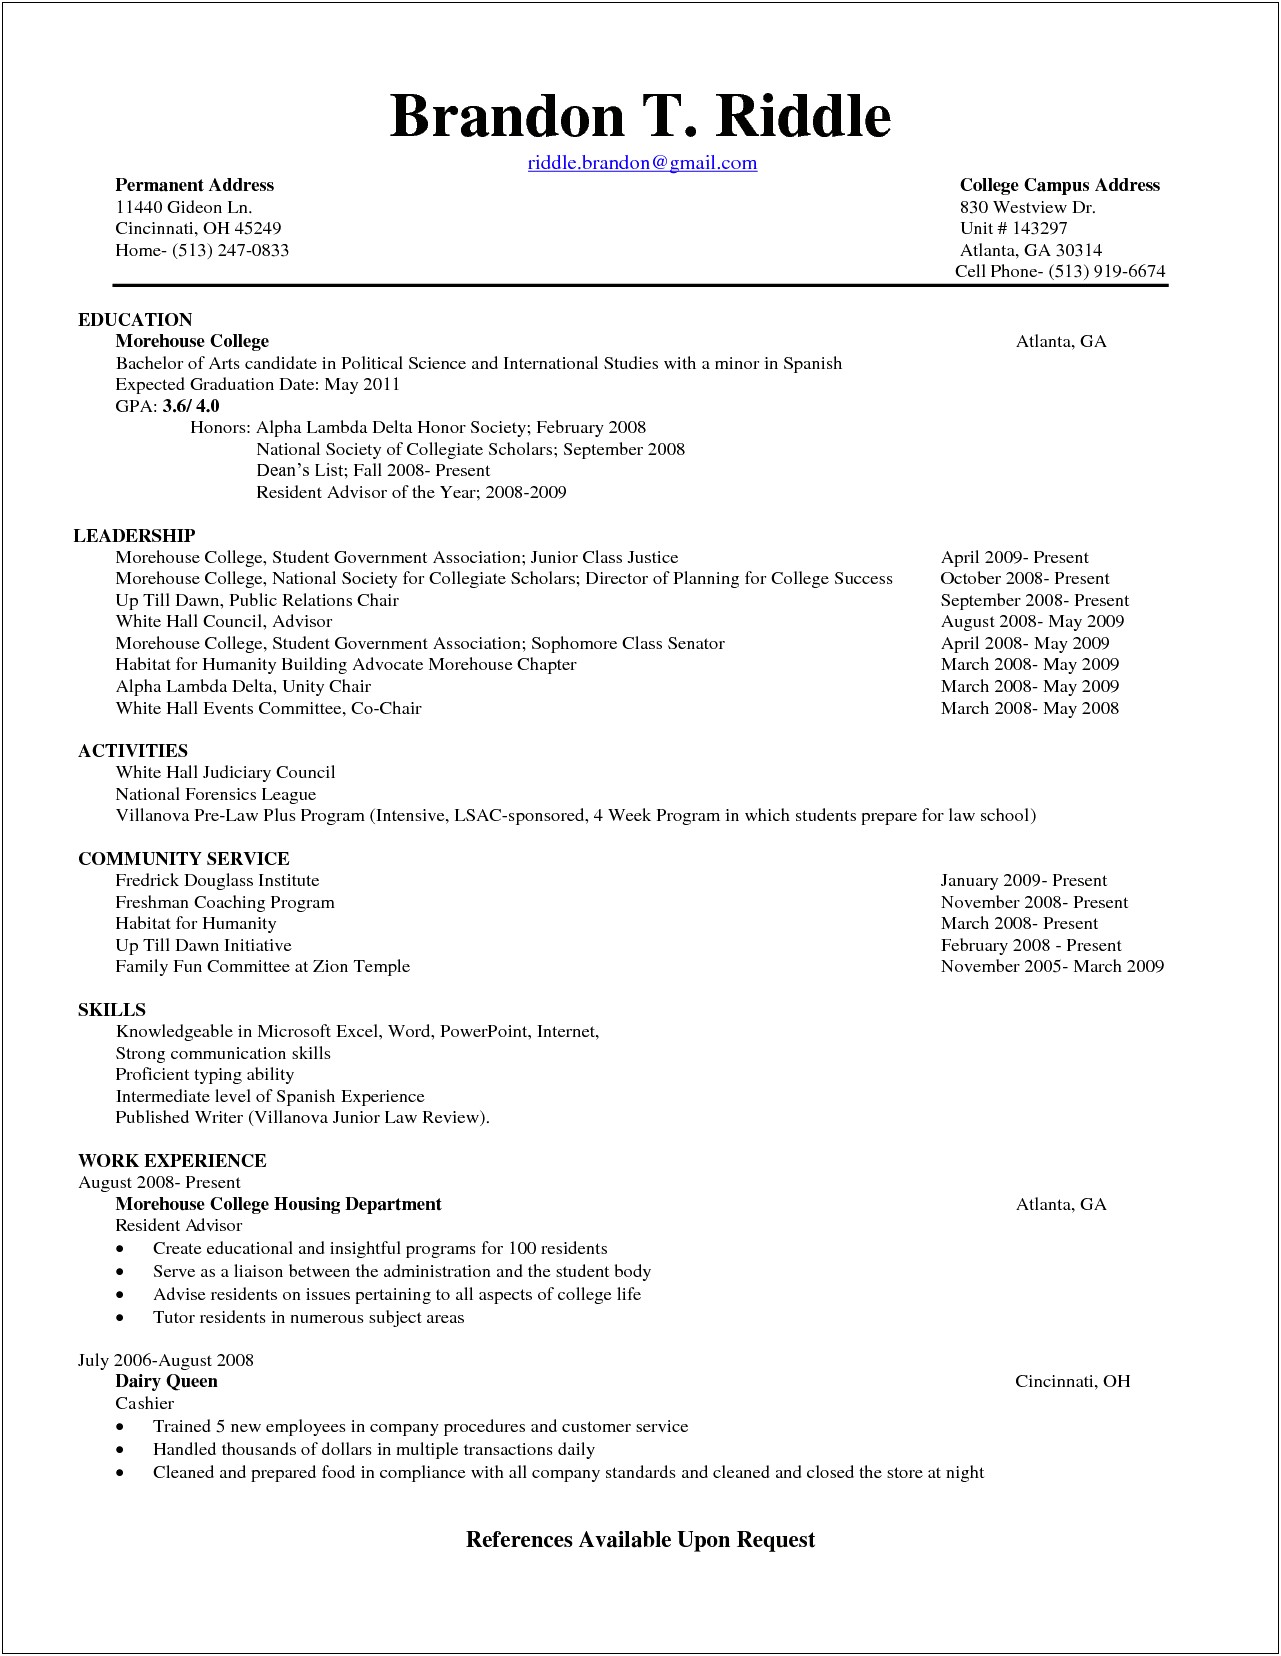 Where To Put Expected Graduation Date On Resume